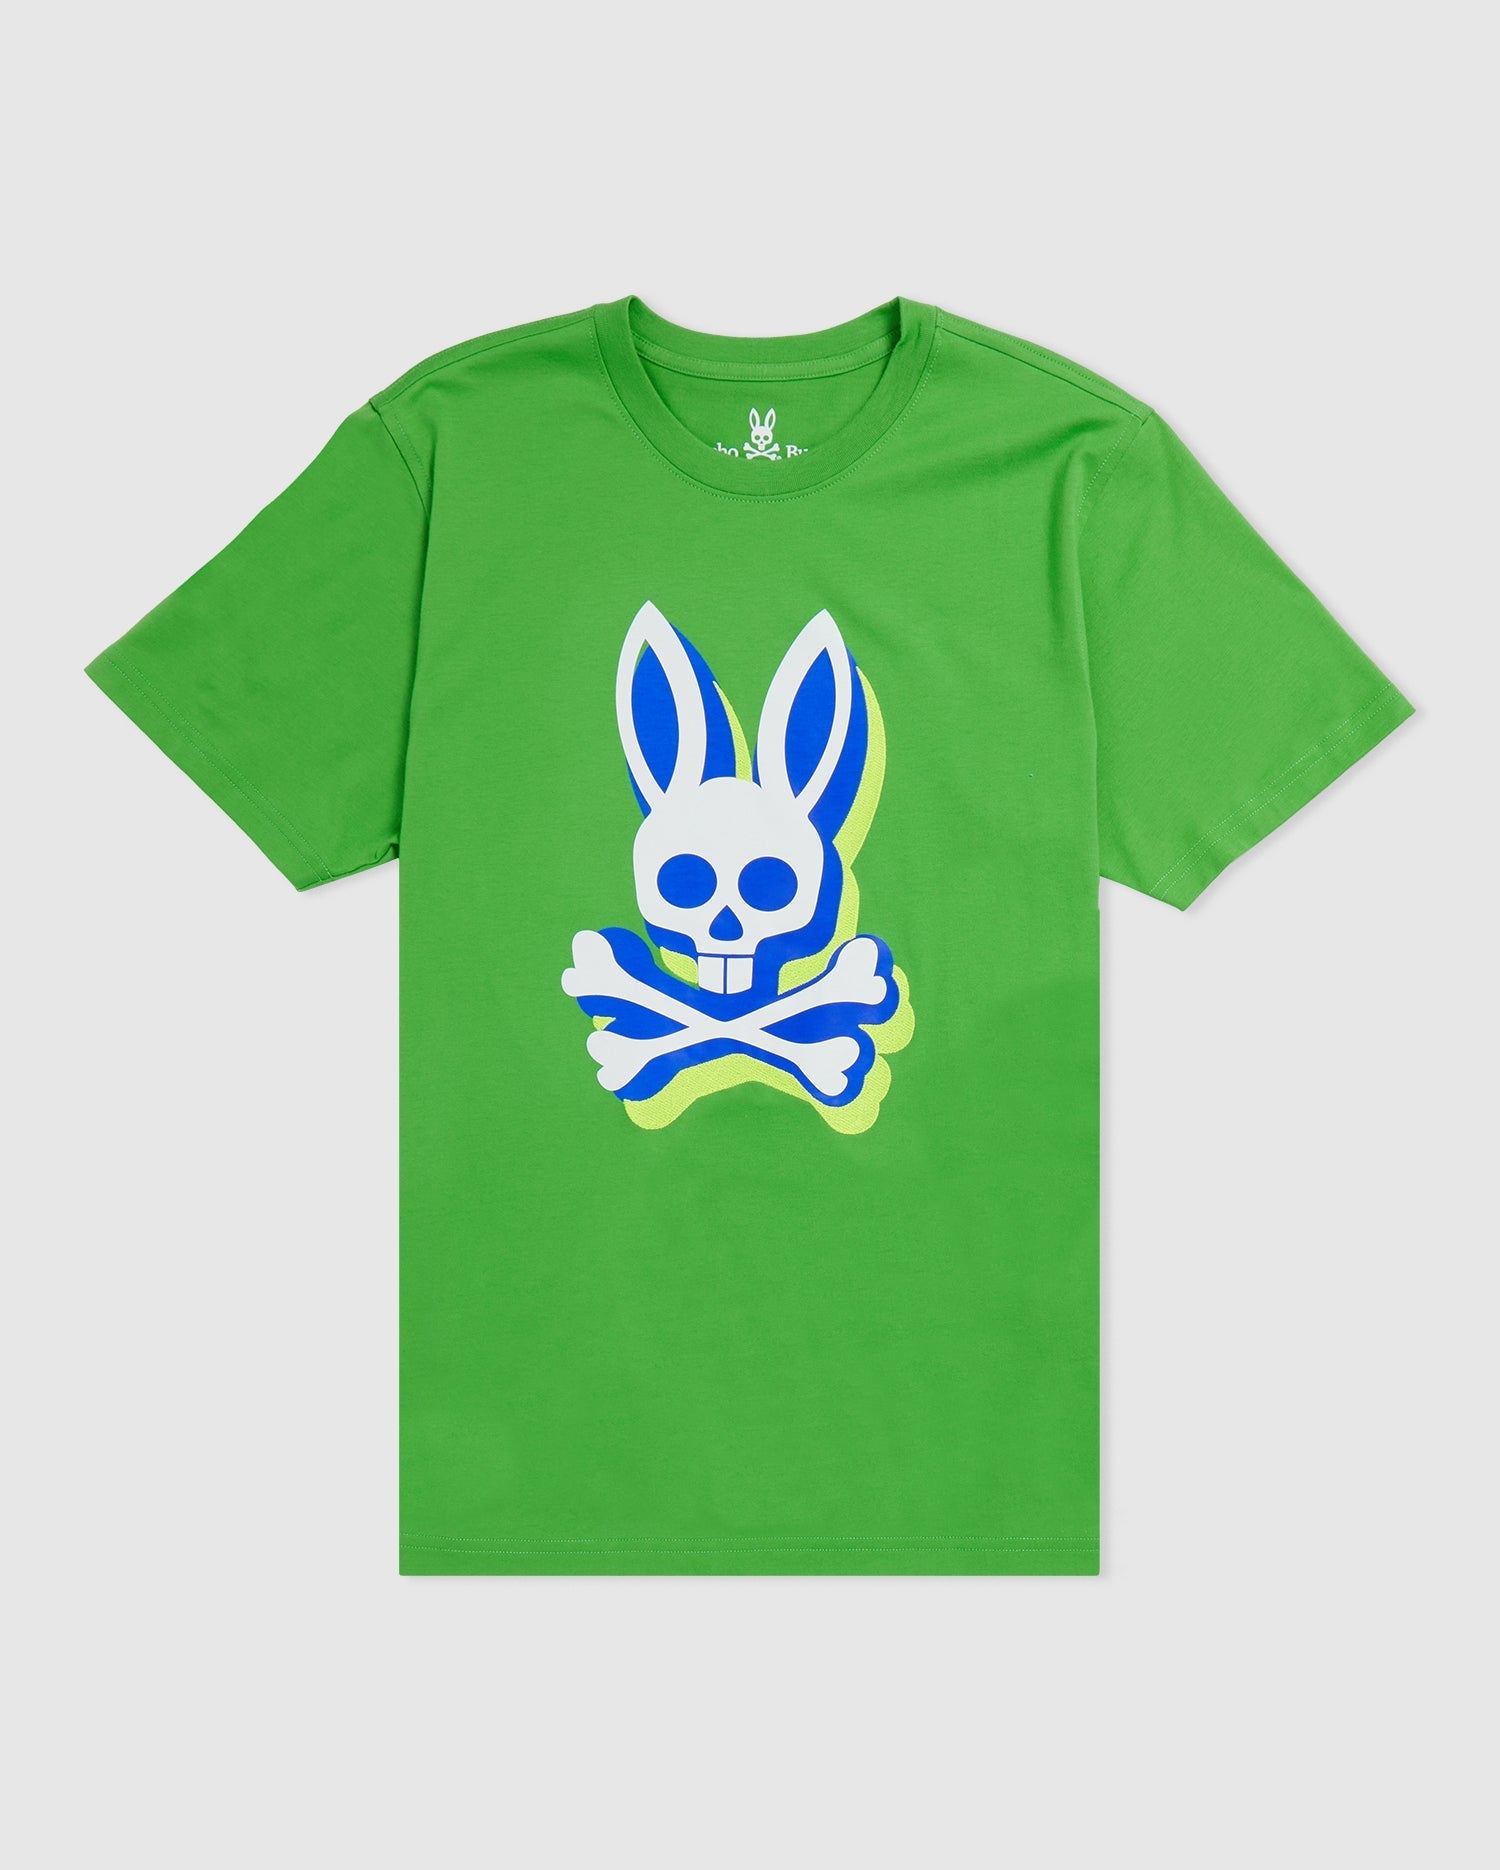 Buy Psycho Bunny Lamport Graphic Tee Shirt at In Style – InStyle